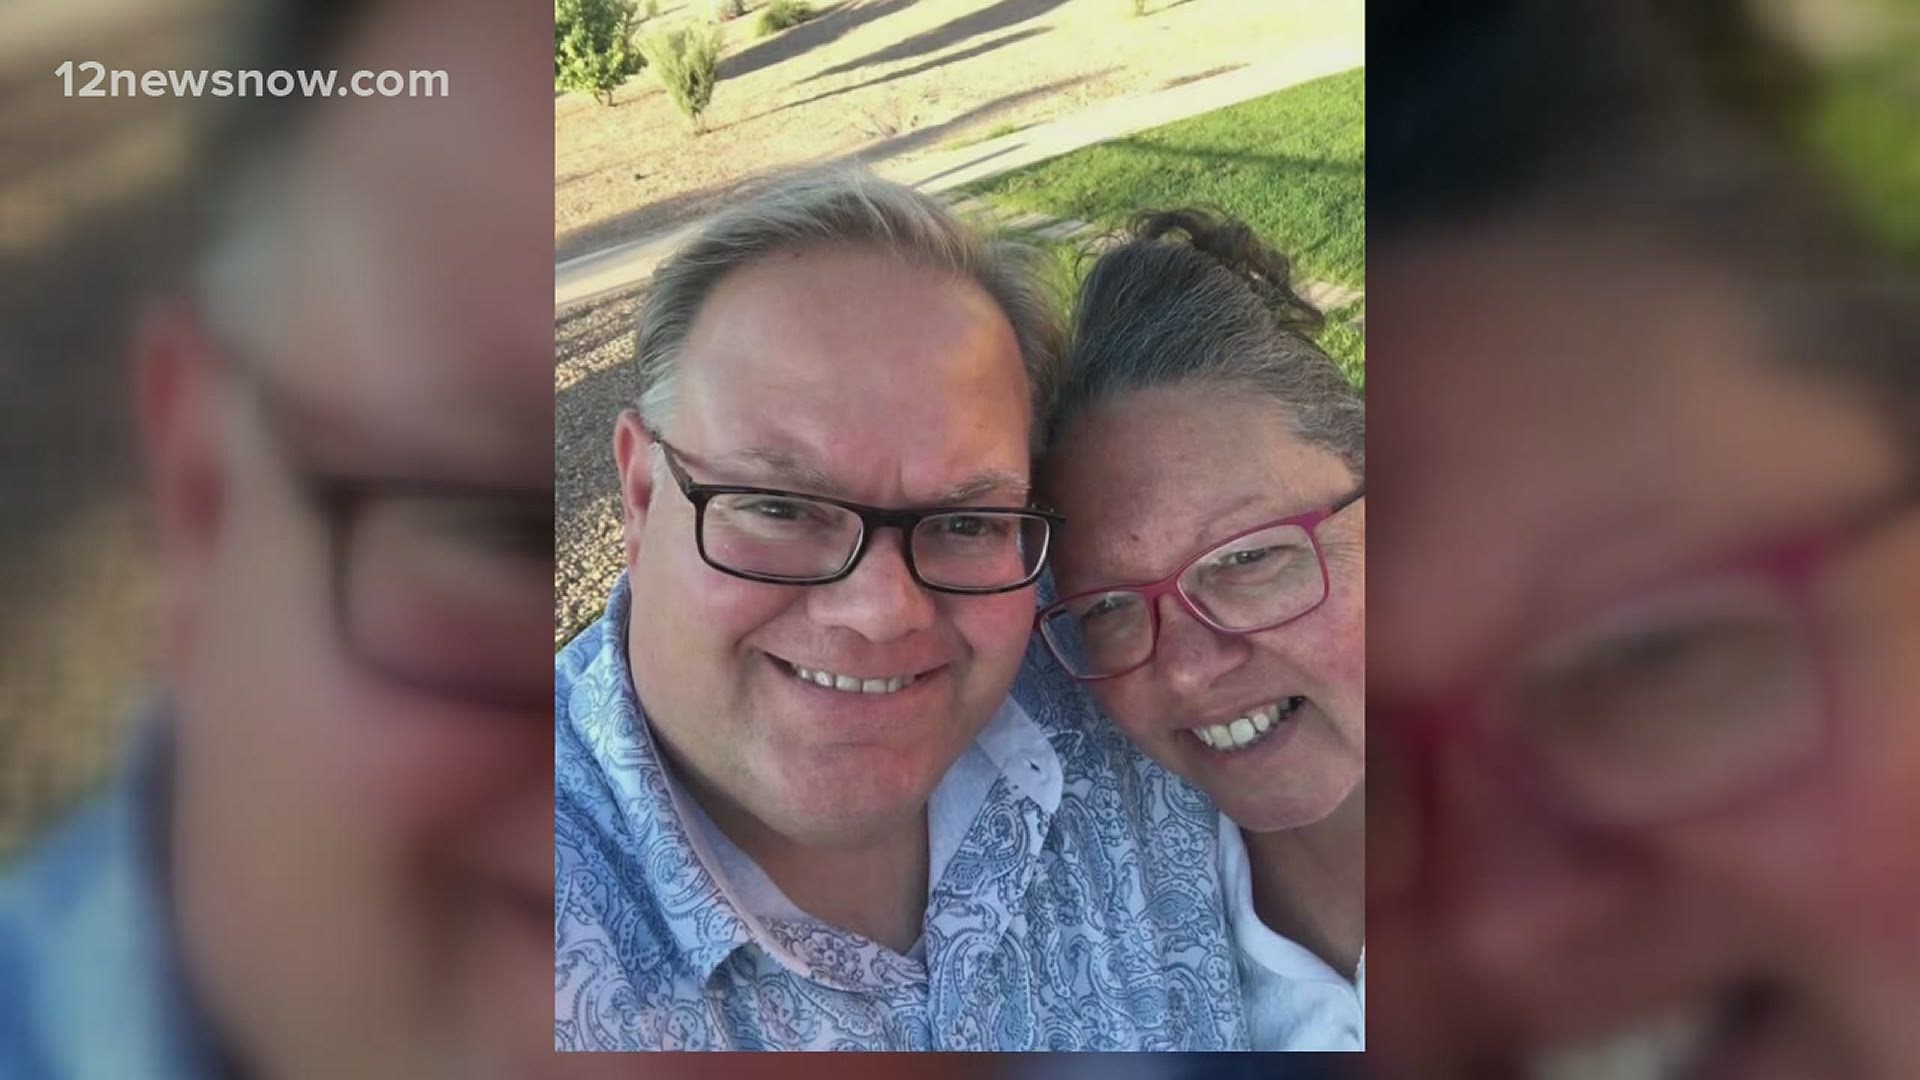 Jeffrey and Valerie Sanders became sick while driving home from a trip to California.